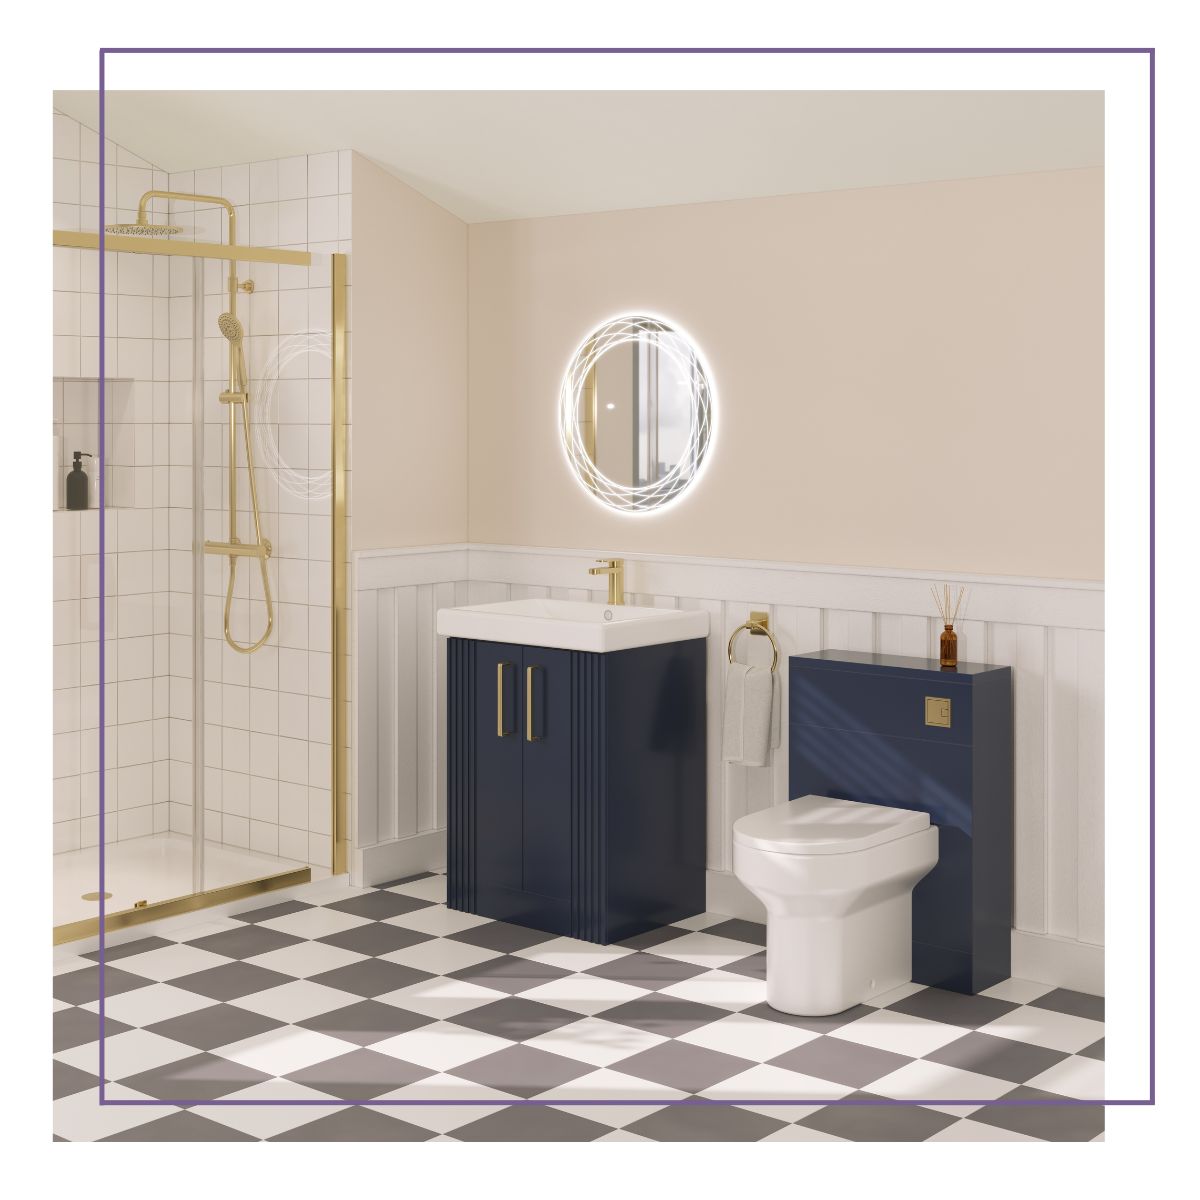 Get into the Groove! Say hello to our latest bathroom furniture range. The Groove is a stunning fluted collection designed to give any bathroom a sophisticated and glamourous feel. #ModernBathrooms #ModernDecor #HomeInteriorUK #GreyBathroom #BathroomFurniture #BeautifulBathrooms